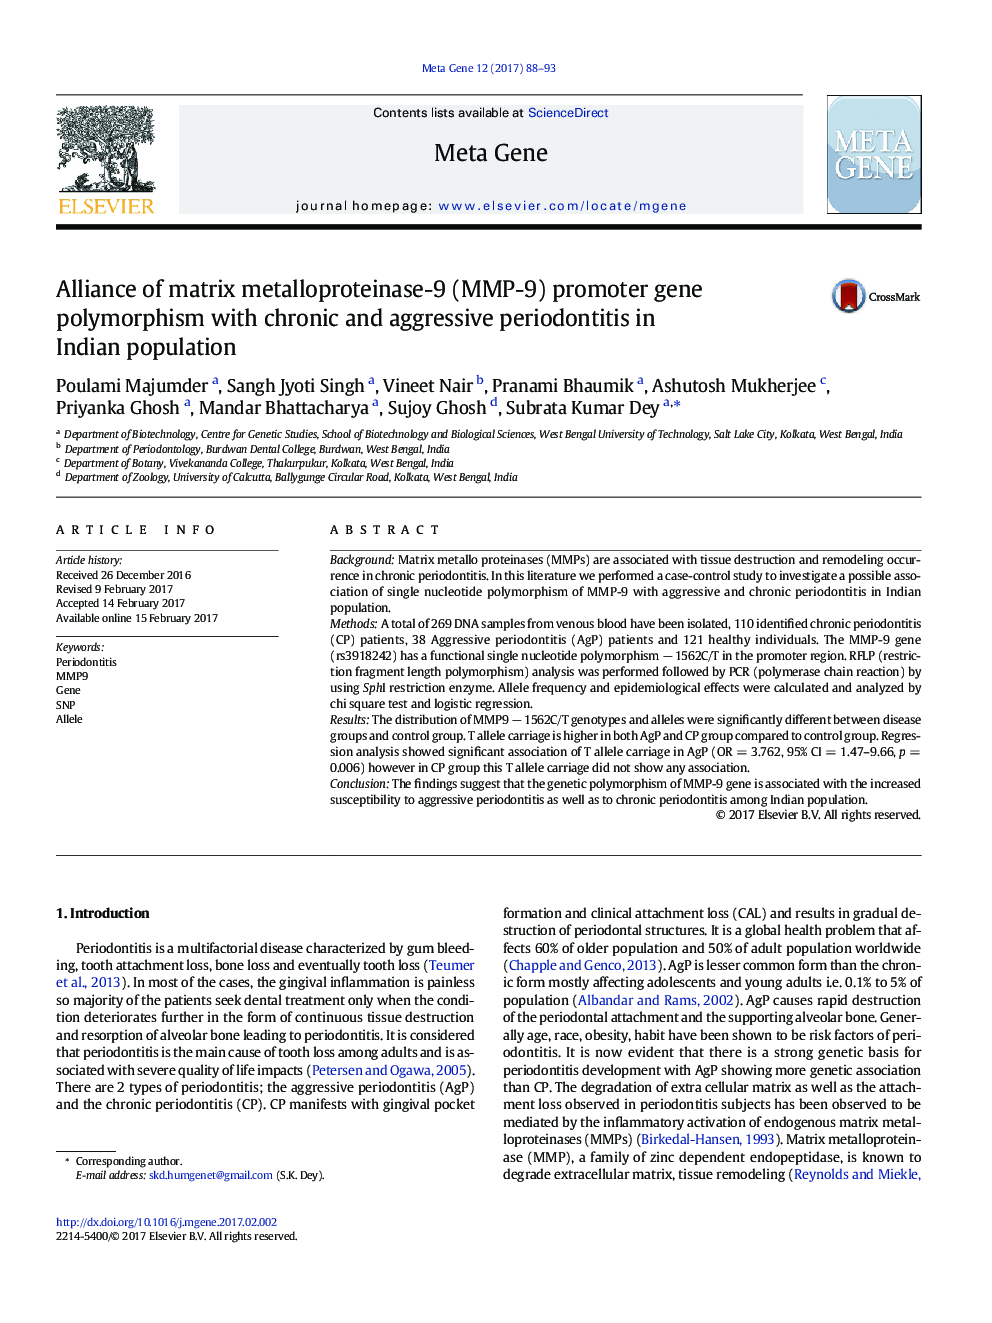 Alliance of matrix metalloproteinase-9 (MMP-9) promoter gene polymorphism with chronic and aggressive periodontitis in Indian population